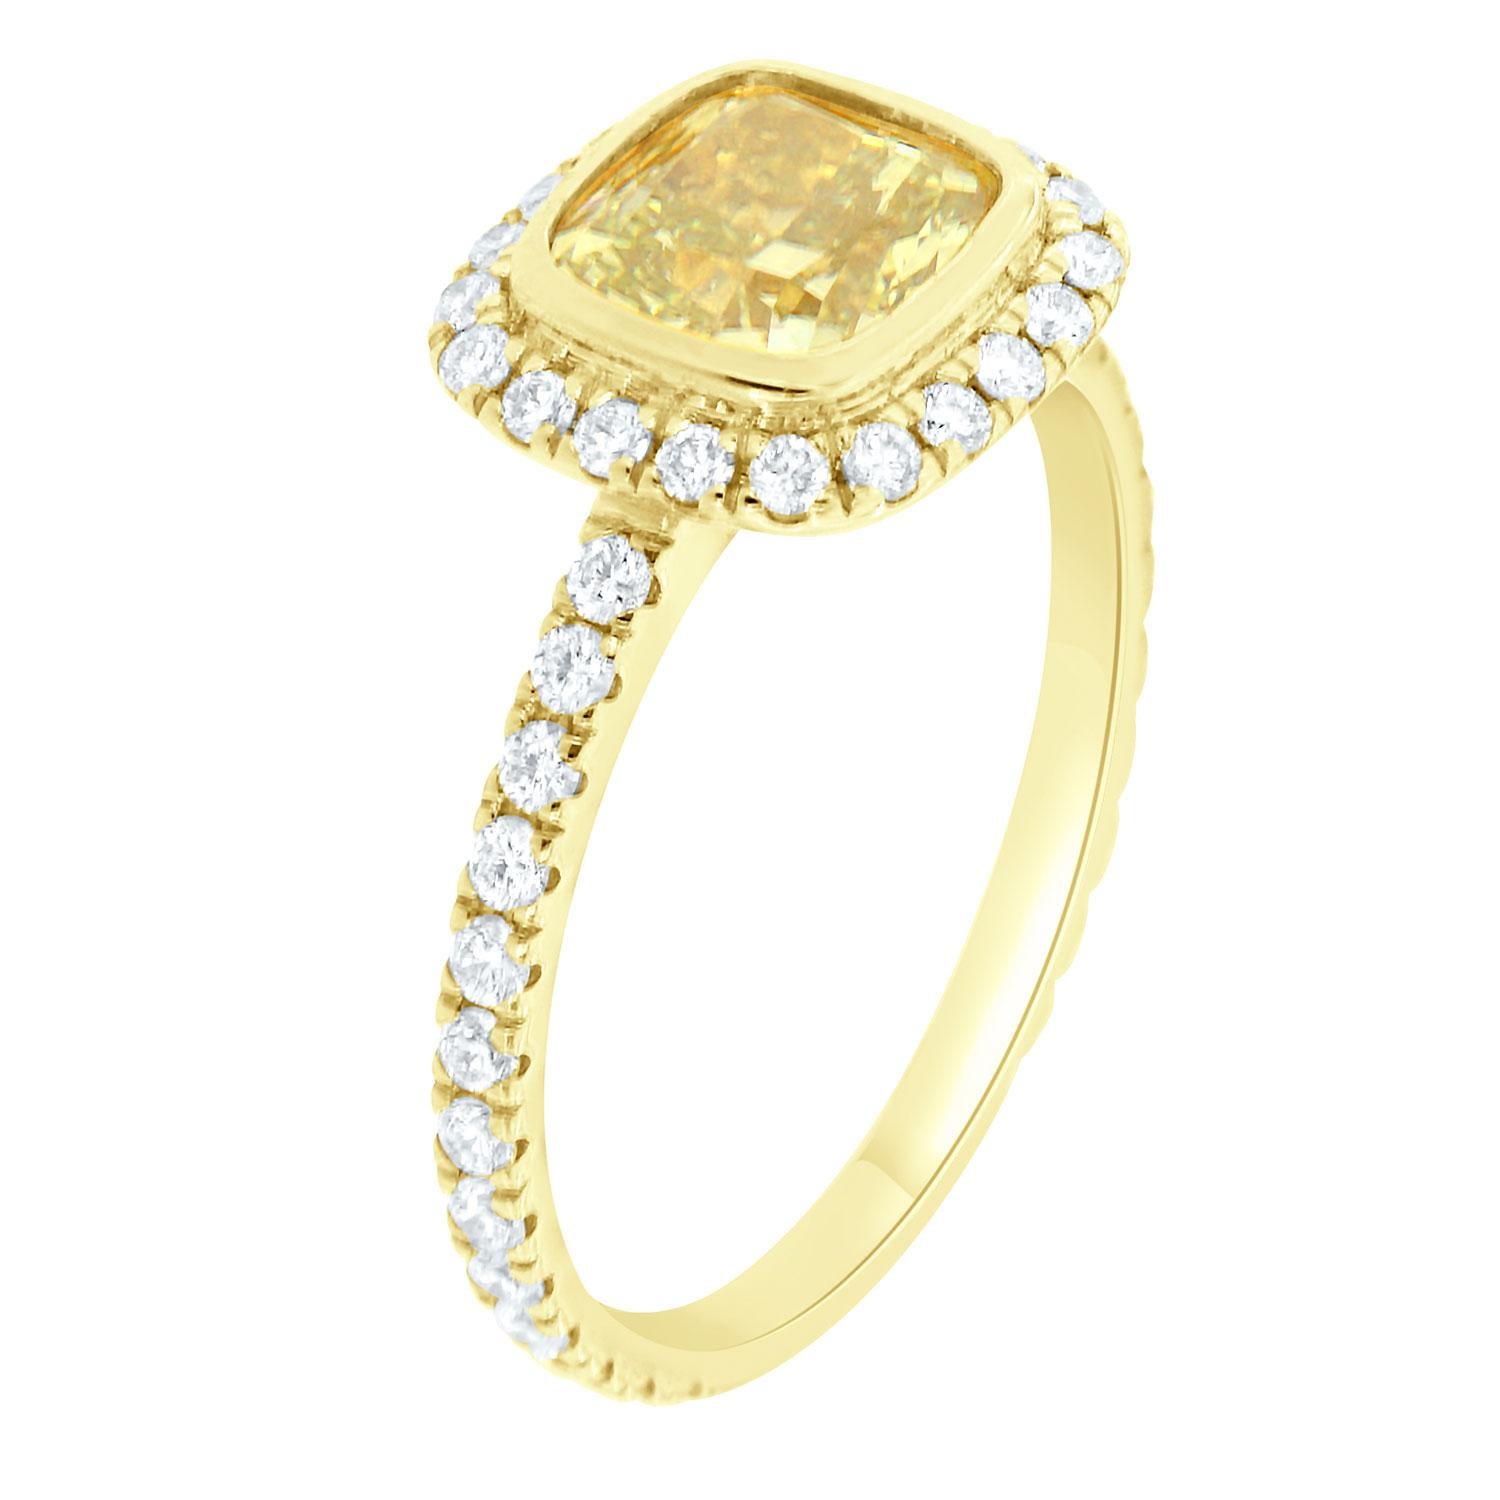 This 18K Yellow gold ring features a 1.52 - Carat Elongated Cushion Natural Yellow Diamond bezel set encircled by a halo of brilliant round diamonds on a one-row 1.7 mm wide band. The diamonds are Micro-Prong set on 75% of the band. The diamond's